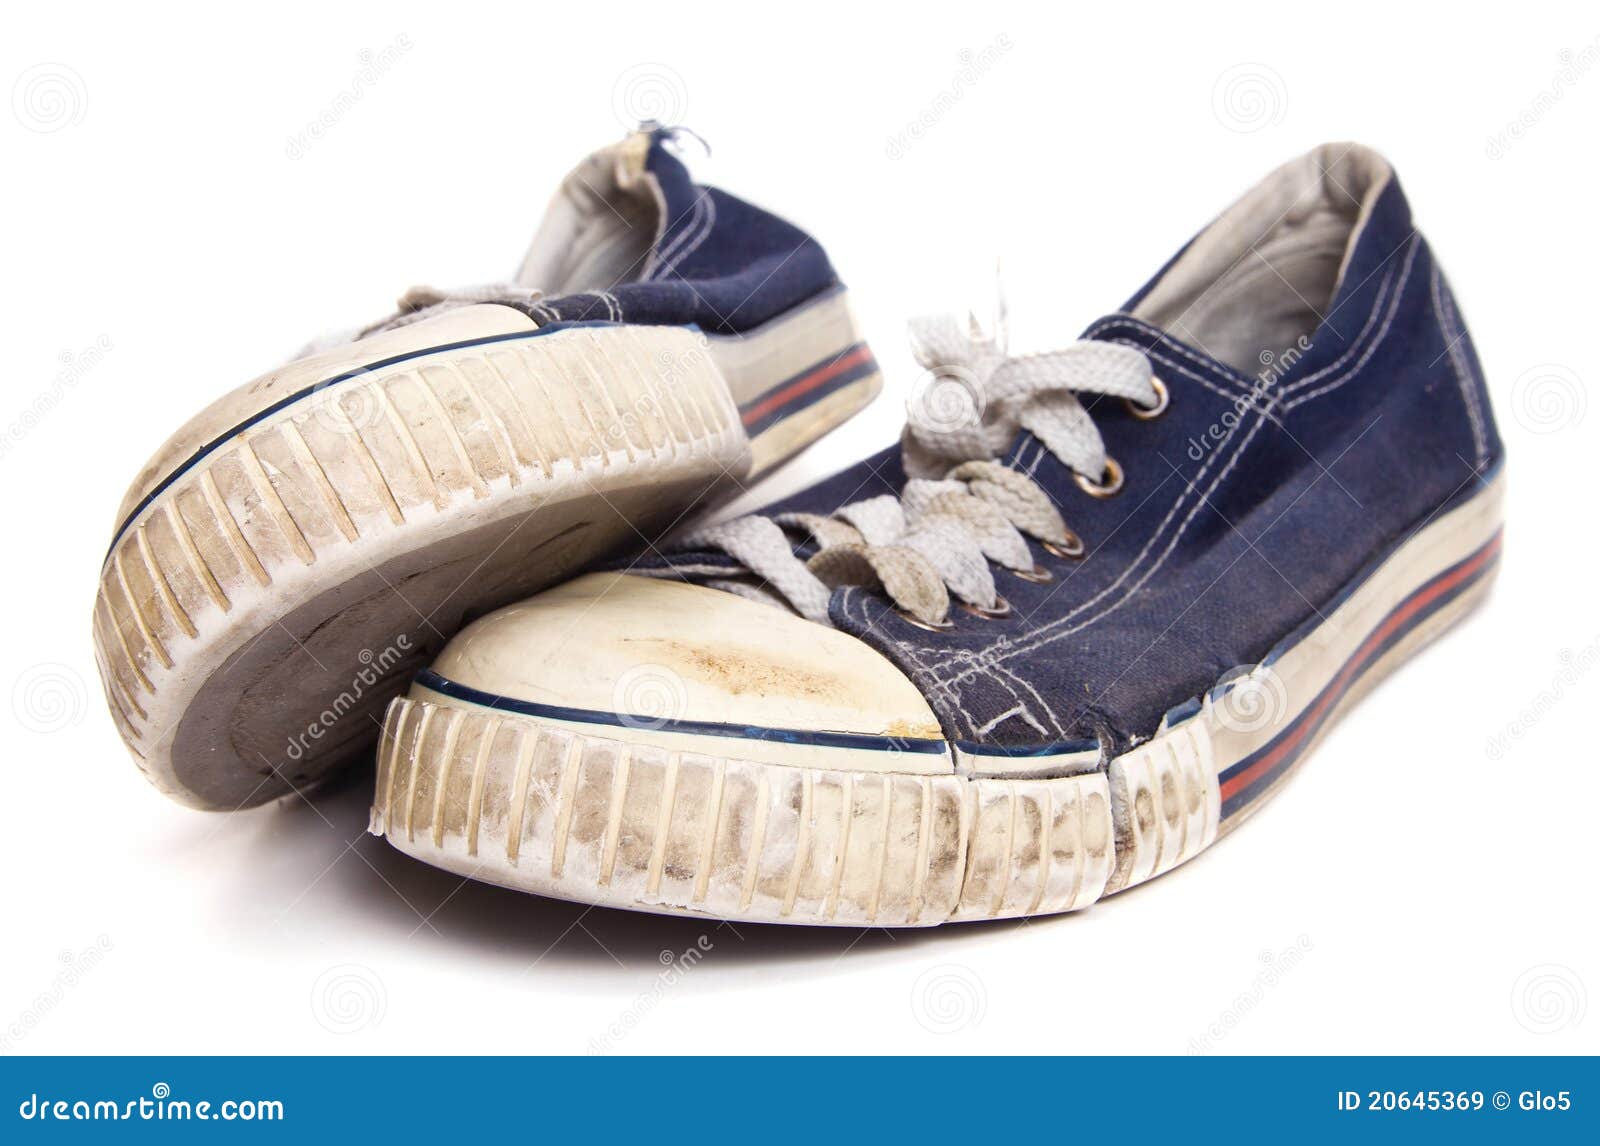 Old sneakers stock image. Image of shoes, sneakers, fashion - 20645369